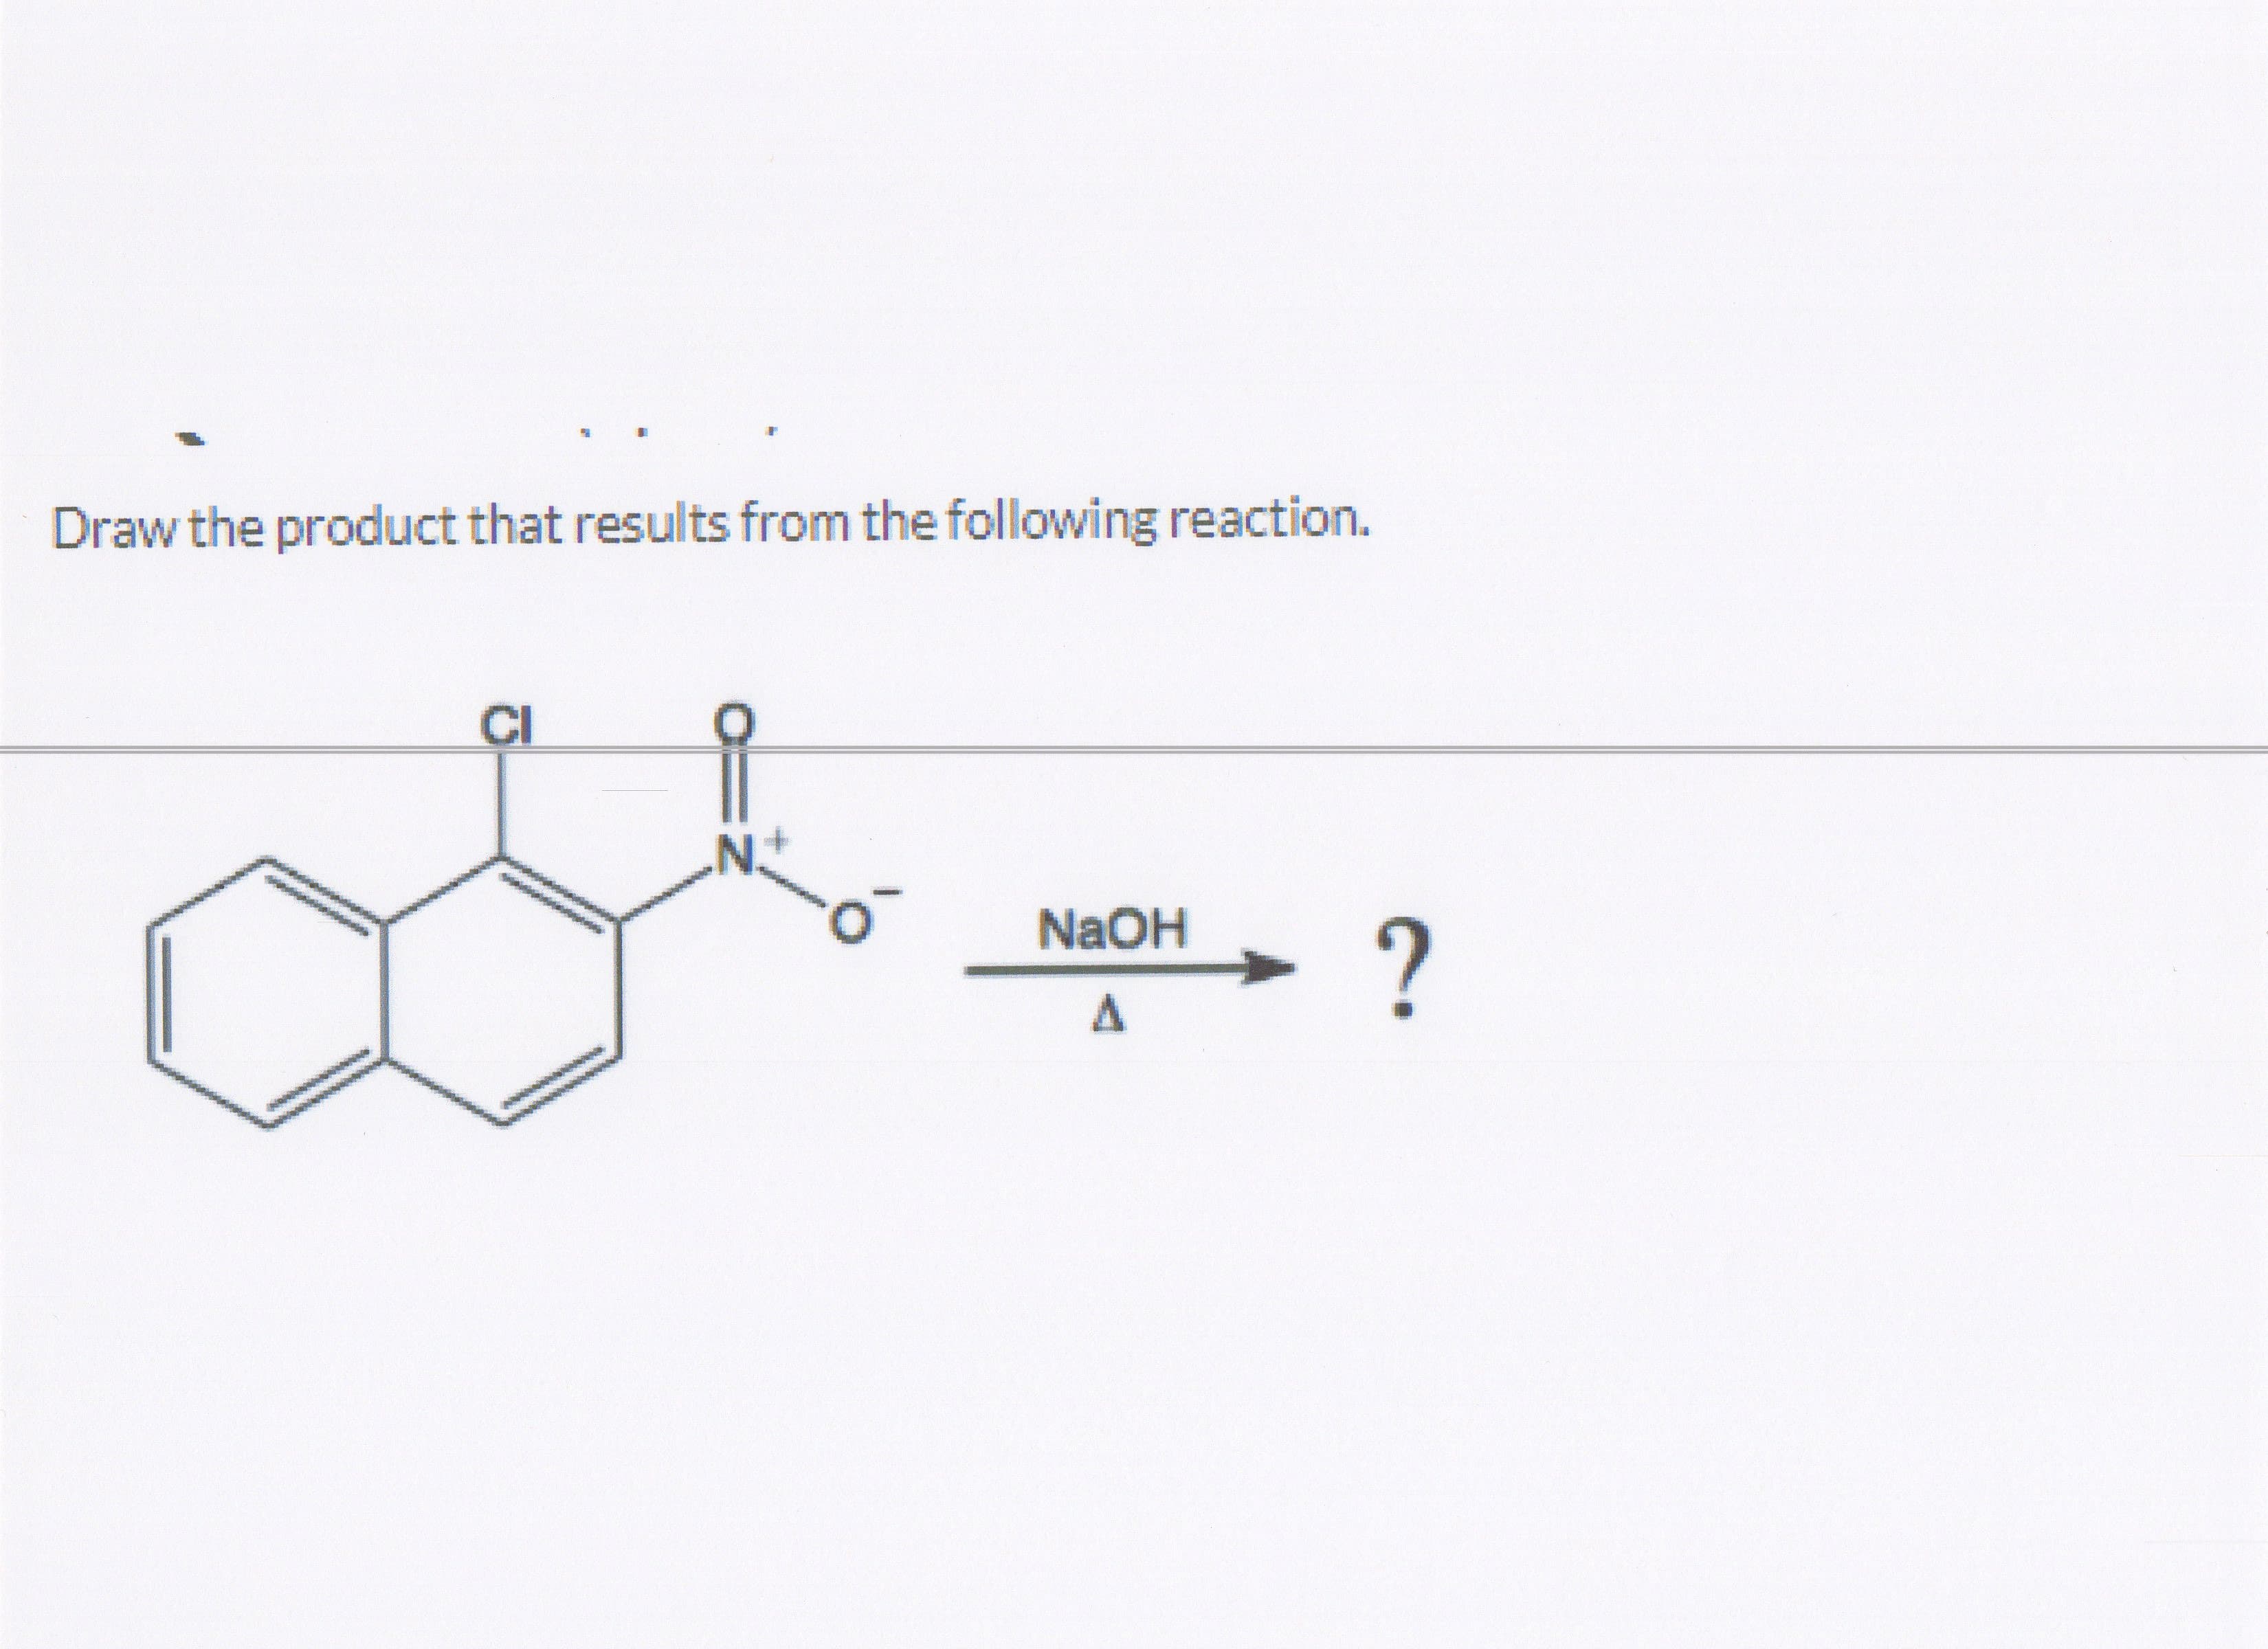 Draw the product that results from the following reaction.
CI
NaOH
?
